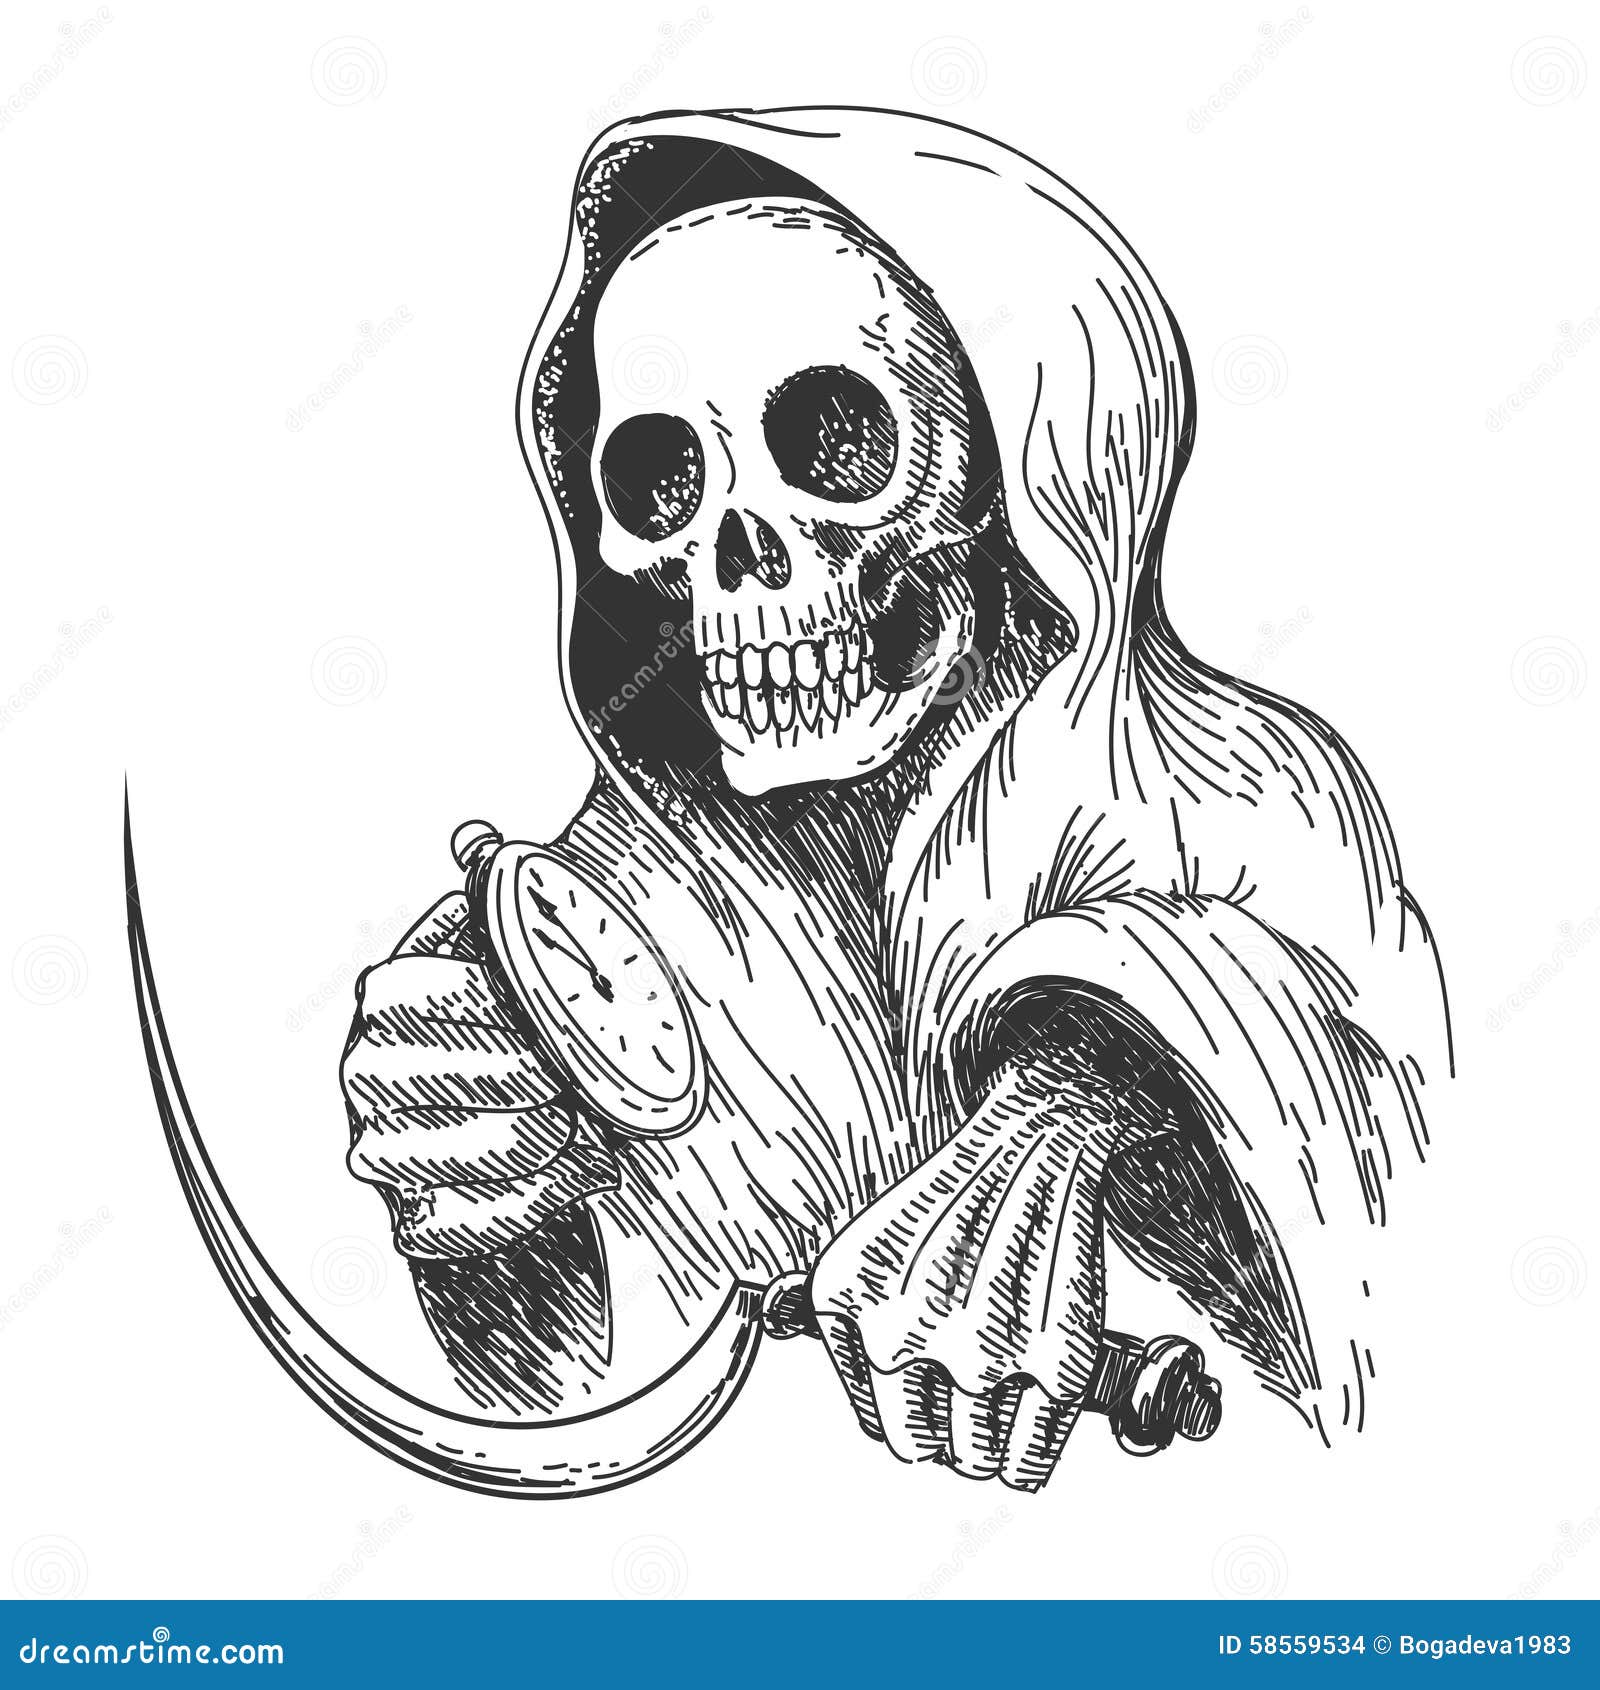 Waiting Death stock vector. Illustration of blade, face - 58559534